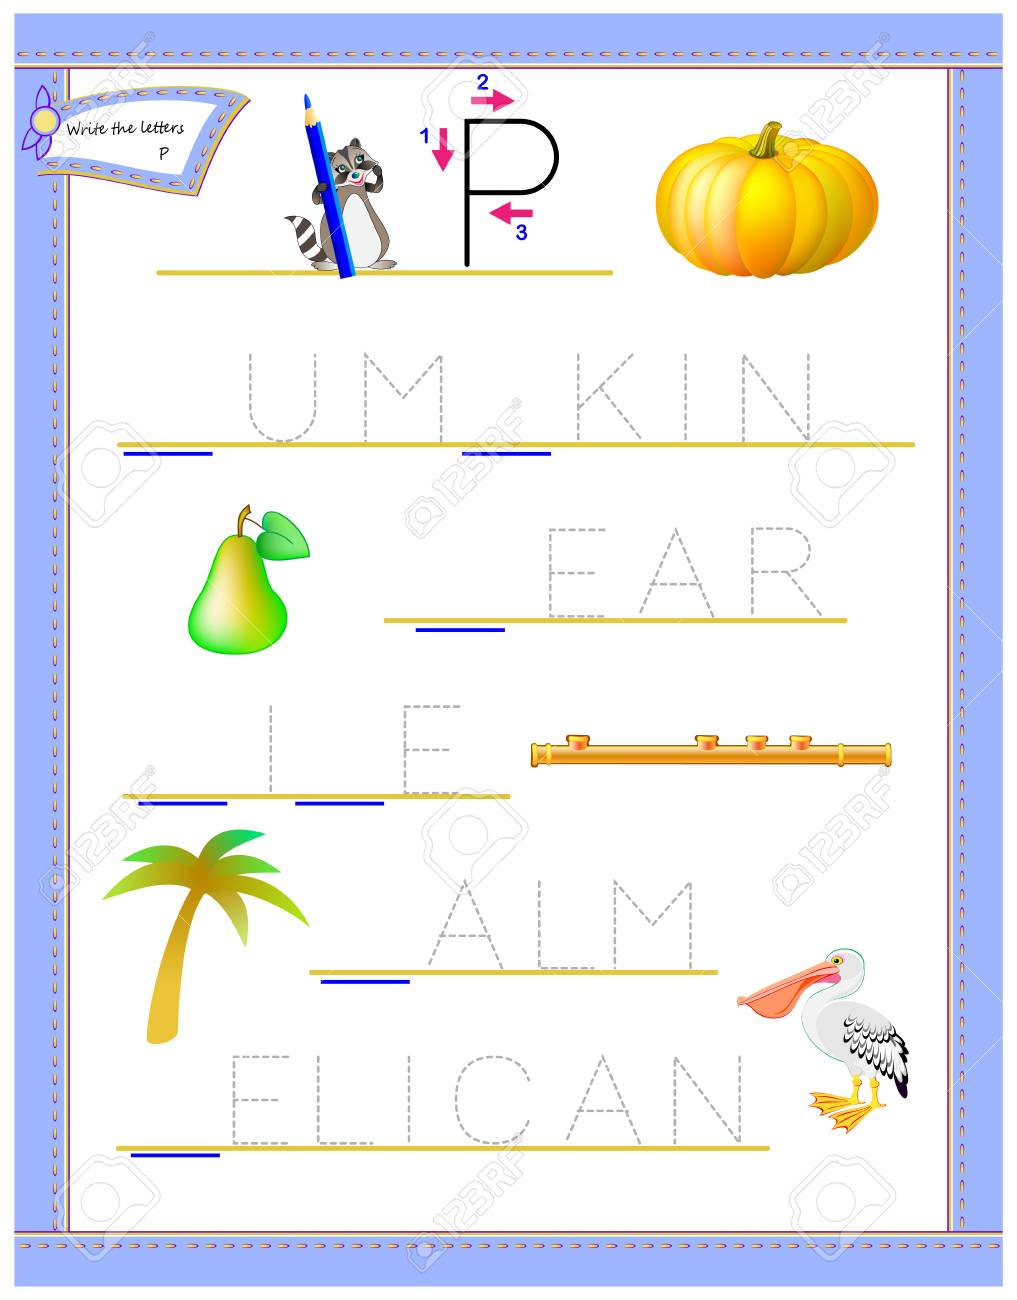 Tracing Letter P For Study English Alphabet. Printable Worksheet - Letter P Puzzle Printable